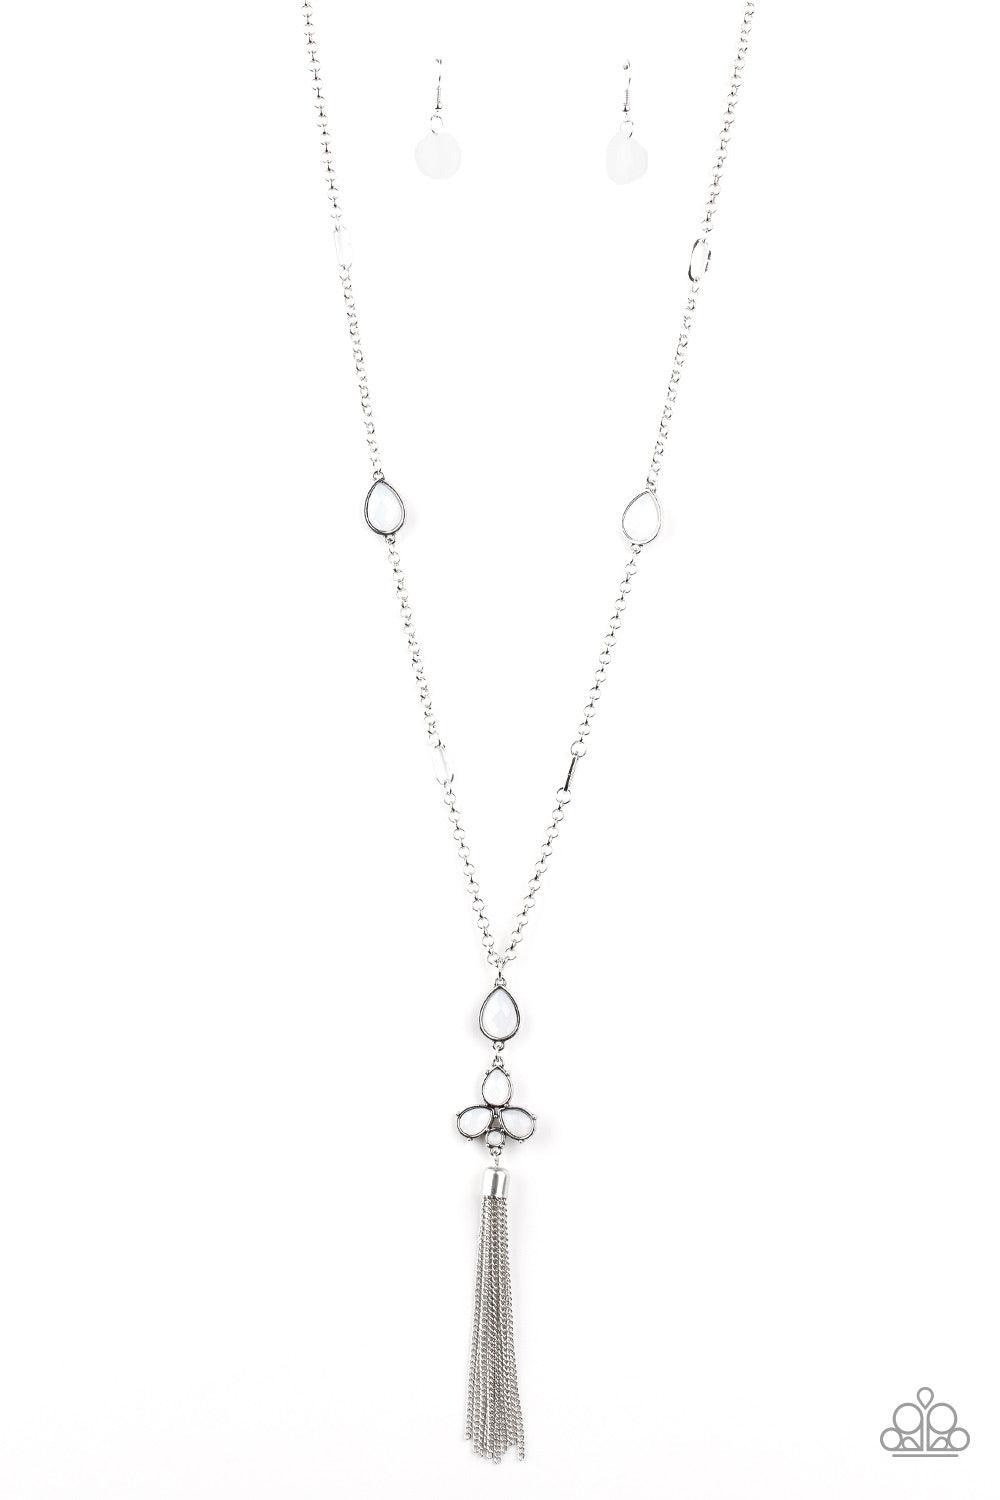 Paparazzi Accessories Eden Dew - White A cluster of dewy white teardrop beads coalesces at the bottom of a lengthened silver chain. Matching beads embedded in airy silver frames dot the chains that climb the chest, bringing an extra pop of color to the wh